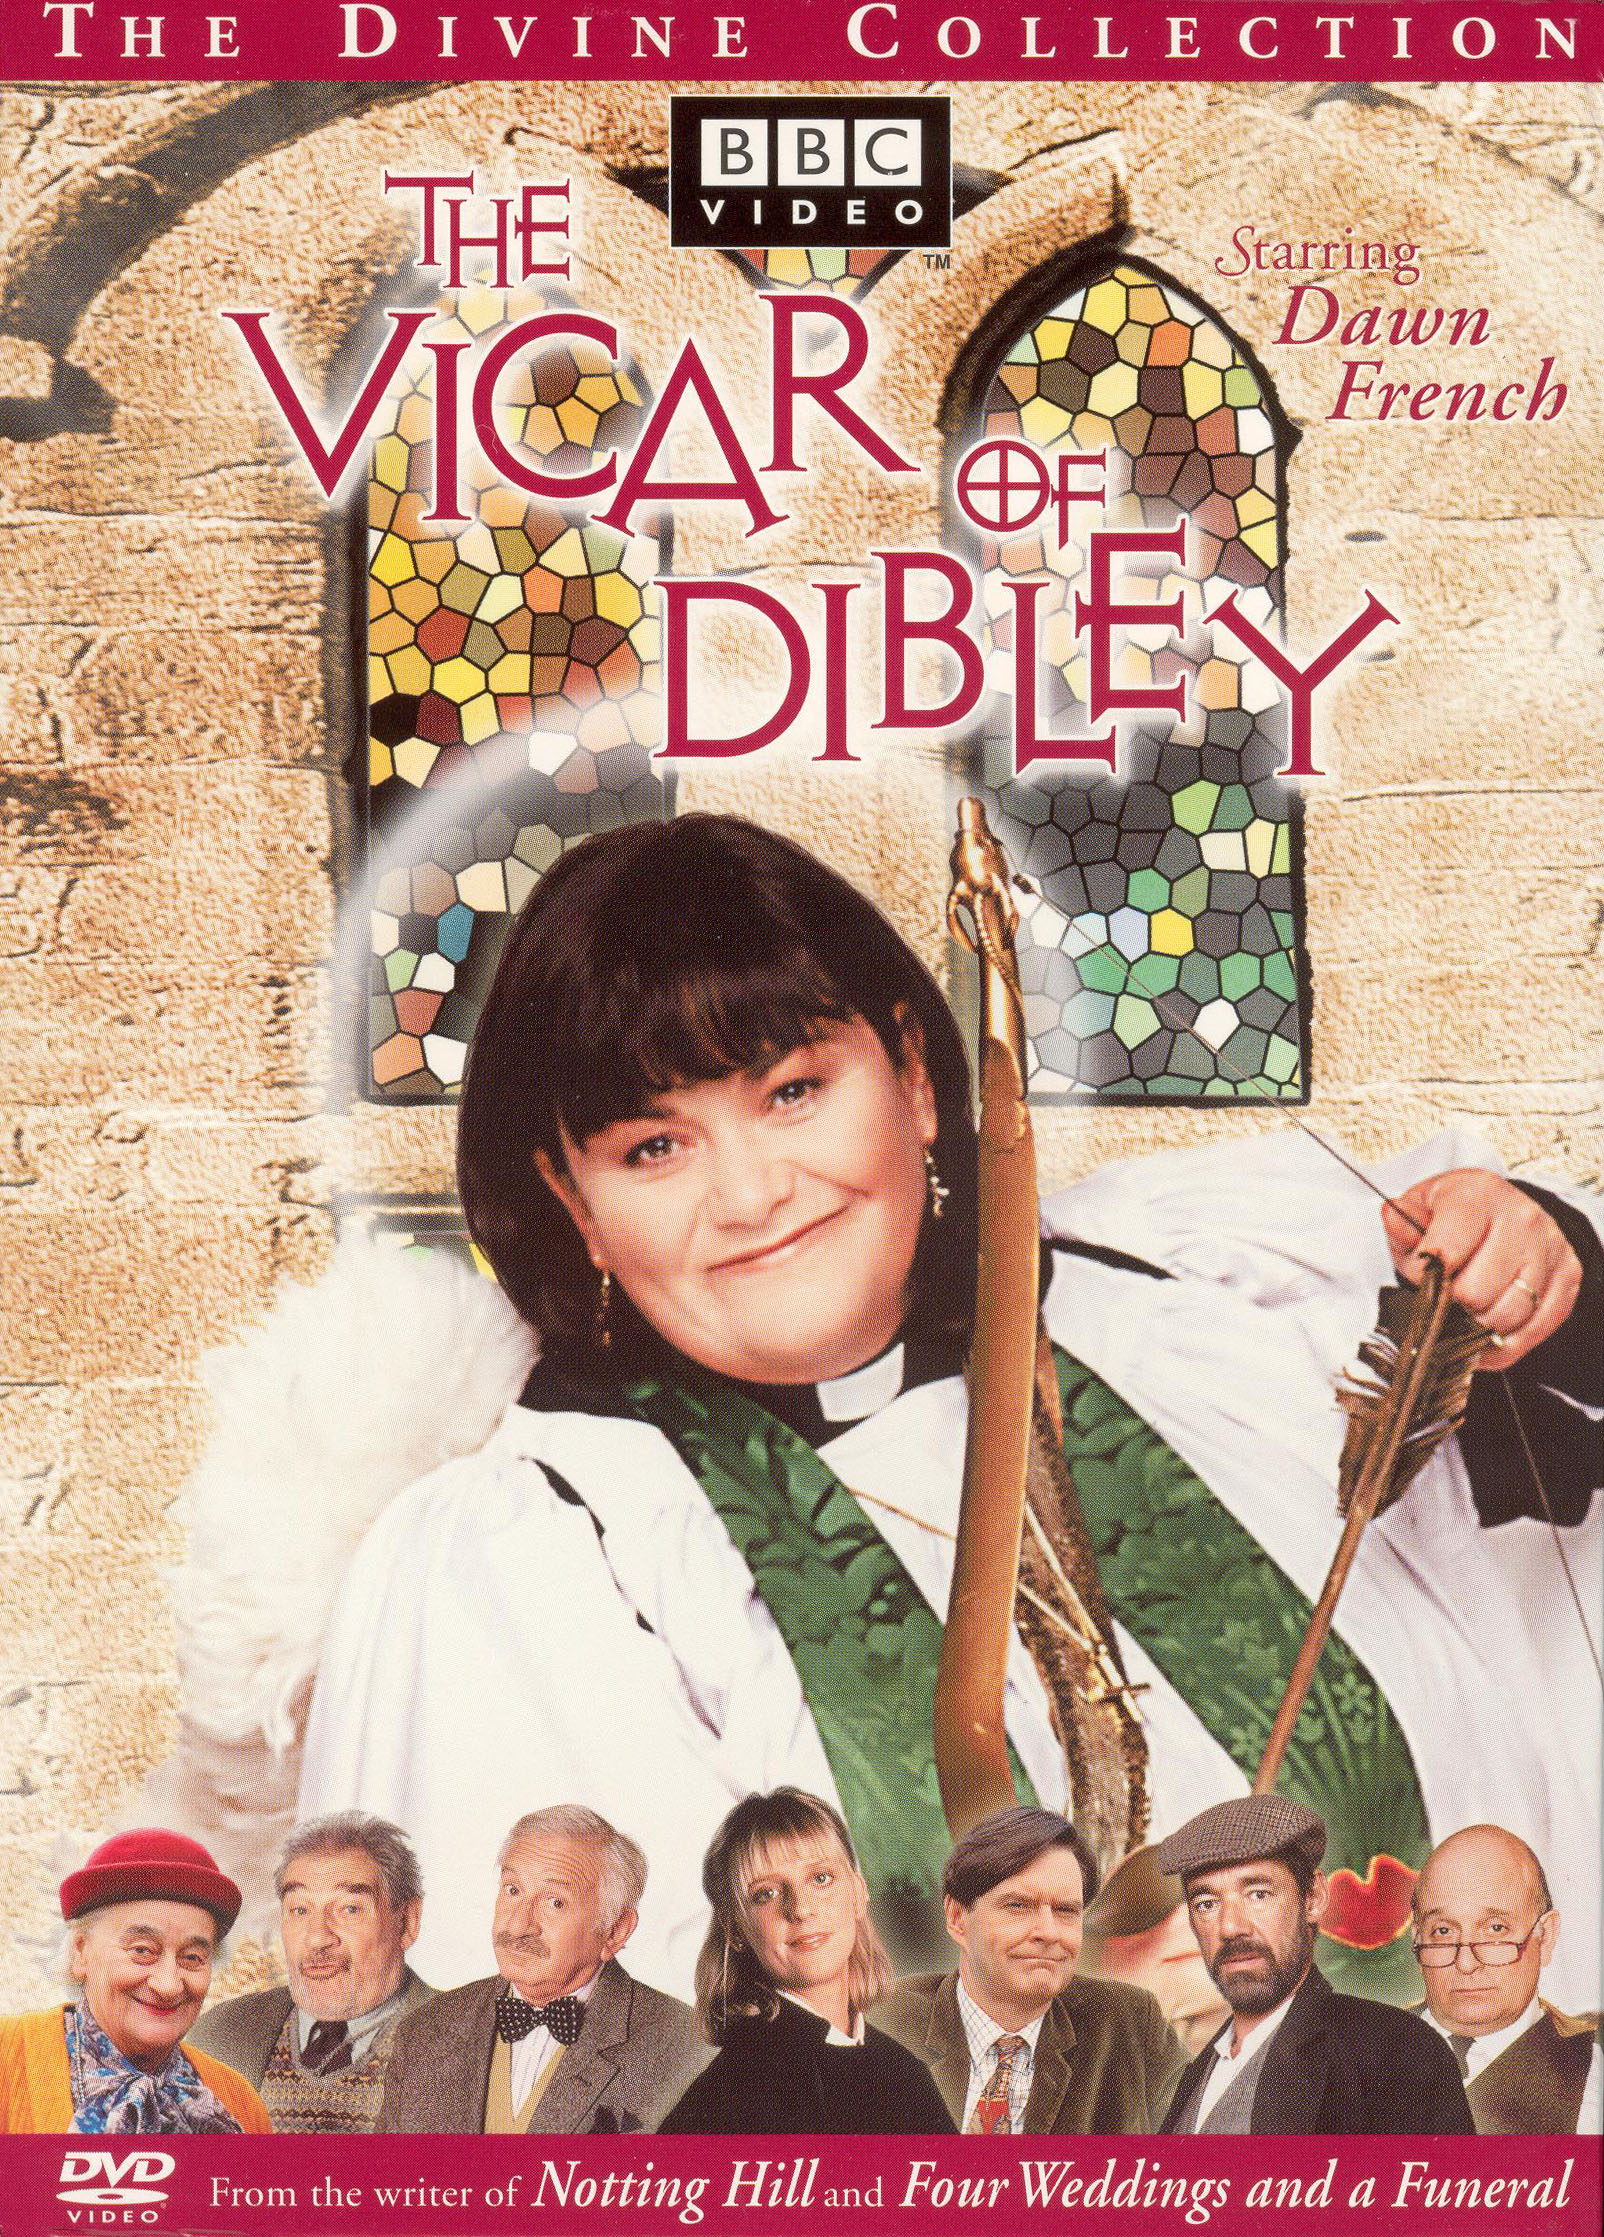 Best Buy: The Vicar of Dibley: The Divine Collection [3 Discs] [DVD]